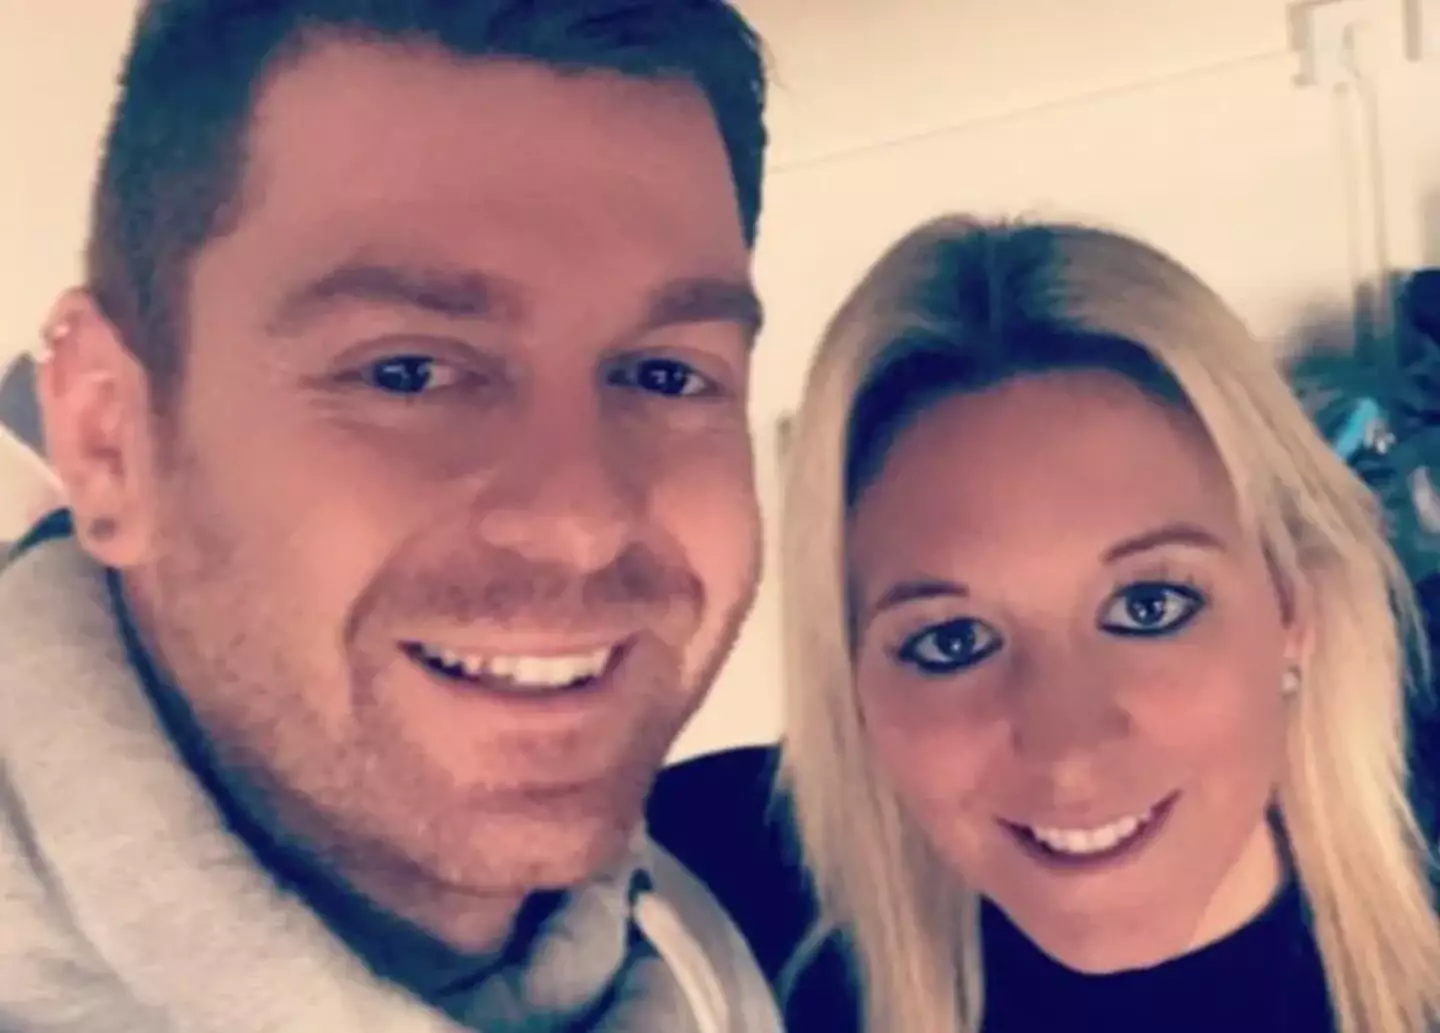 Laura Sugden and Shane Gilmer were attacked with a crossbow in their home in East Yorkshire.